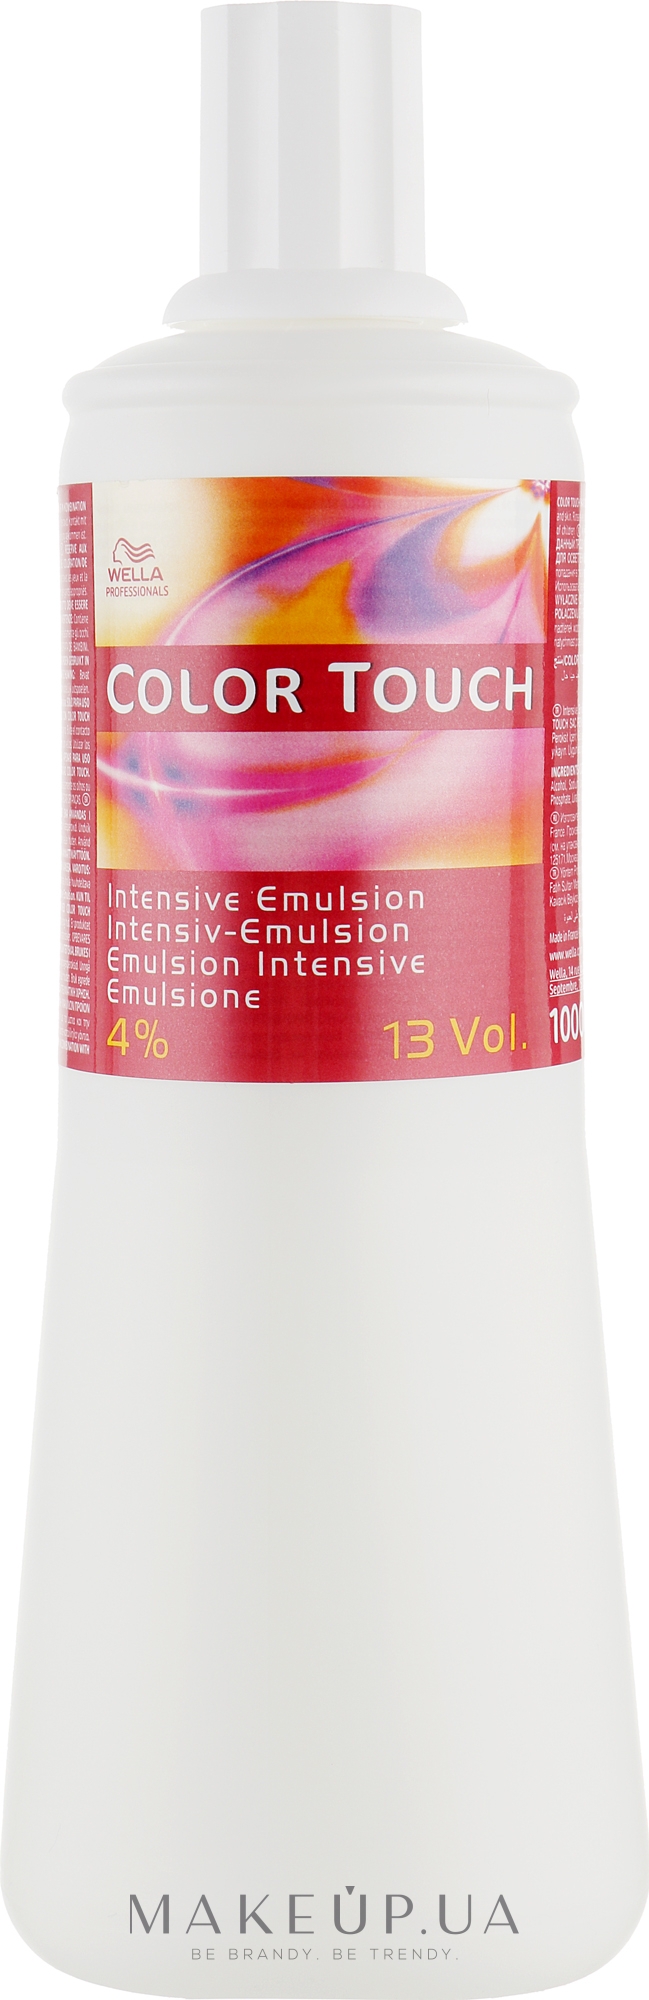 Емульсія для фарби Color Touch - Wella Professional Color Touch Emulsion 4% — фото 1000ml